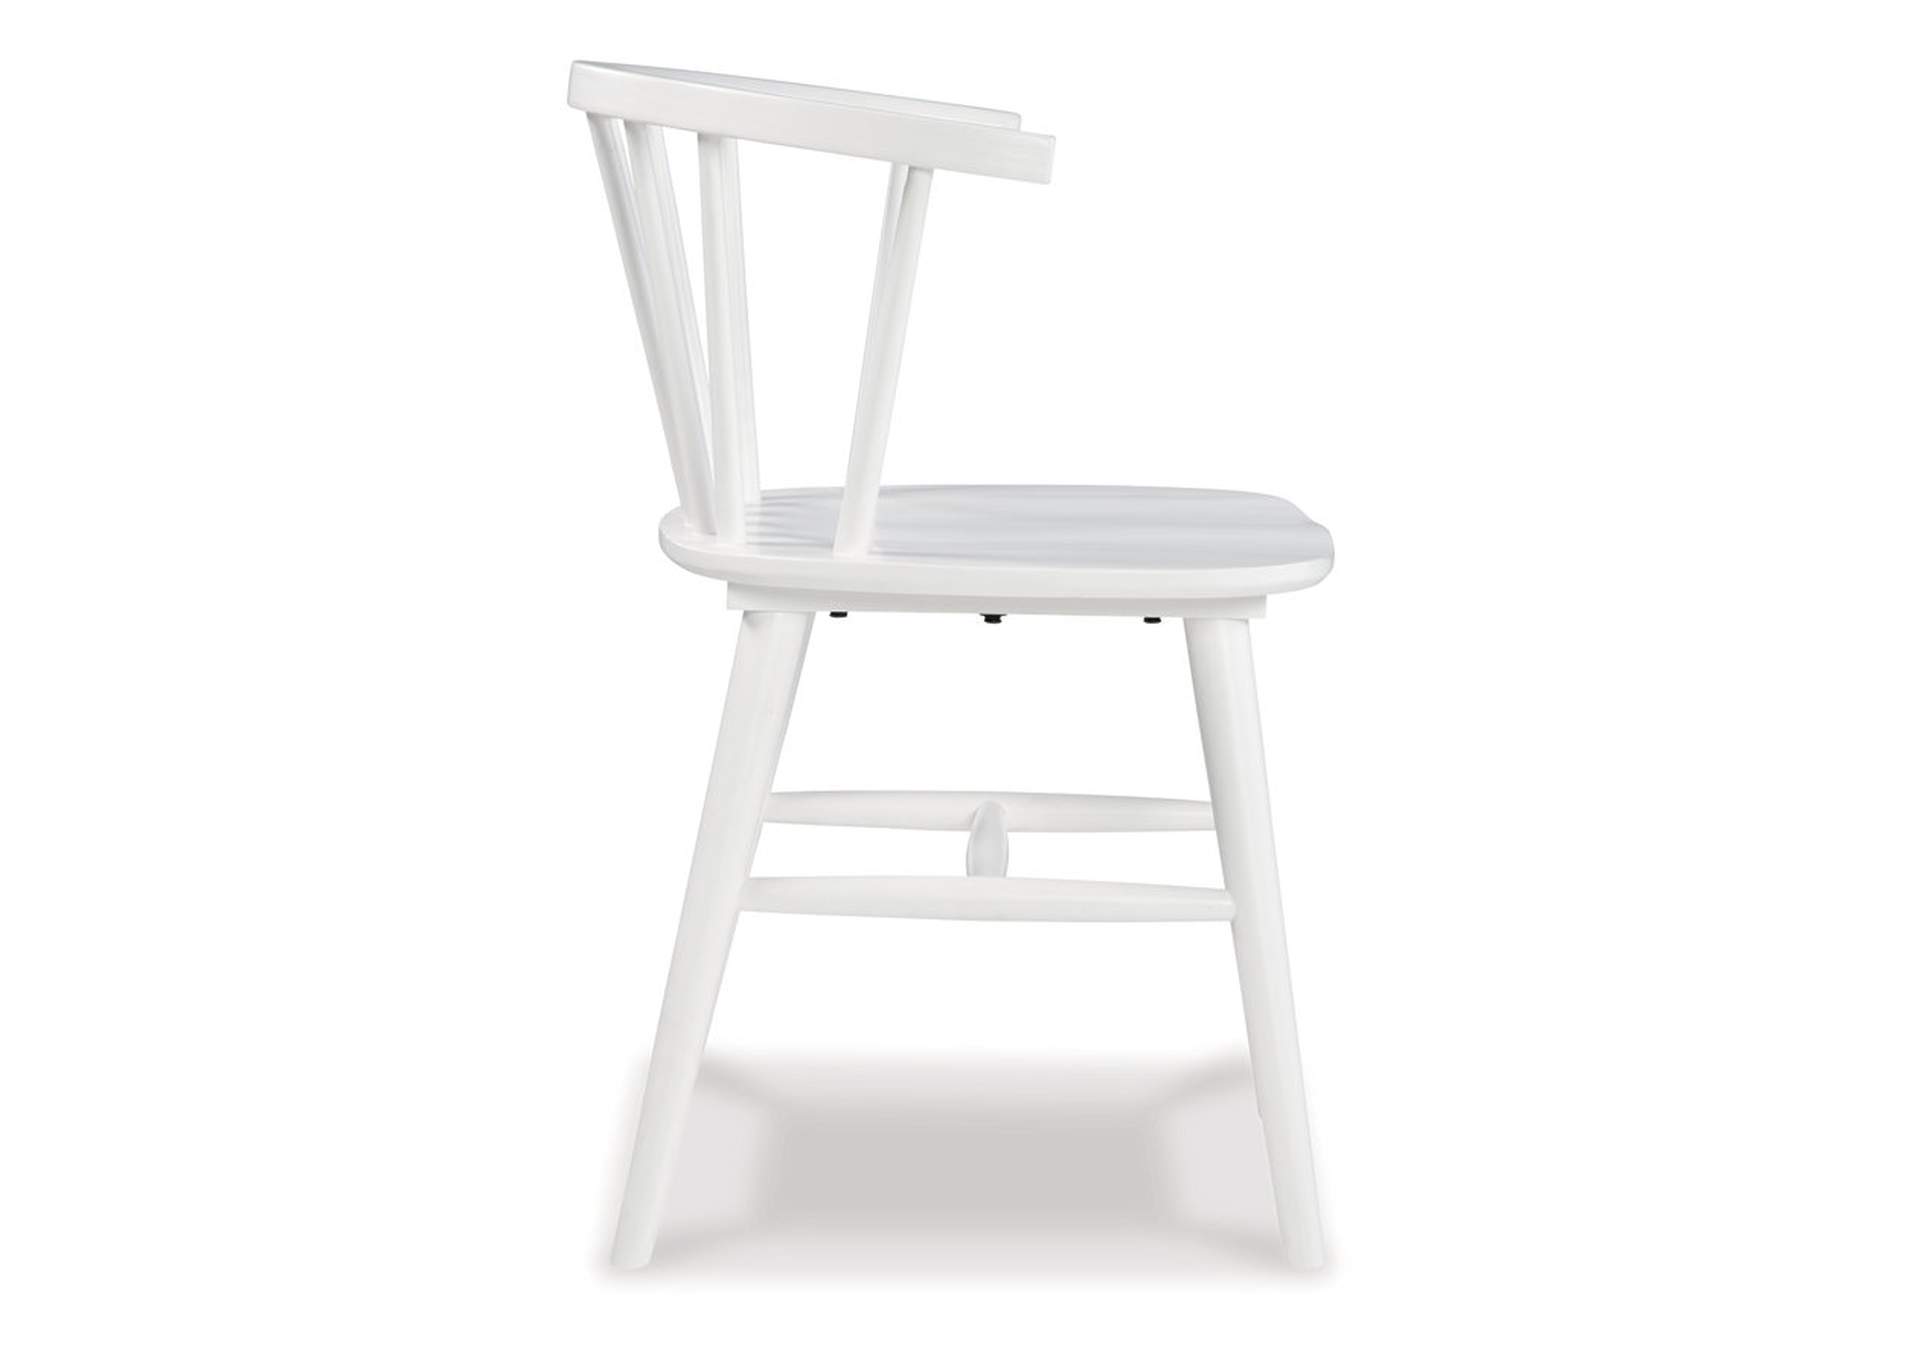 Grannen Dining Chair,Signature Design By Ashley